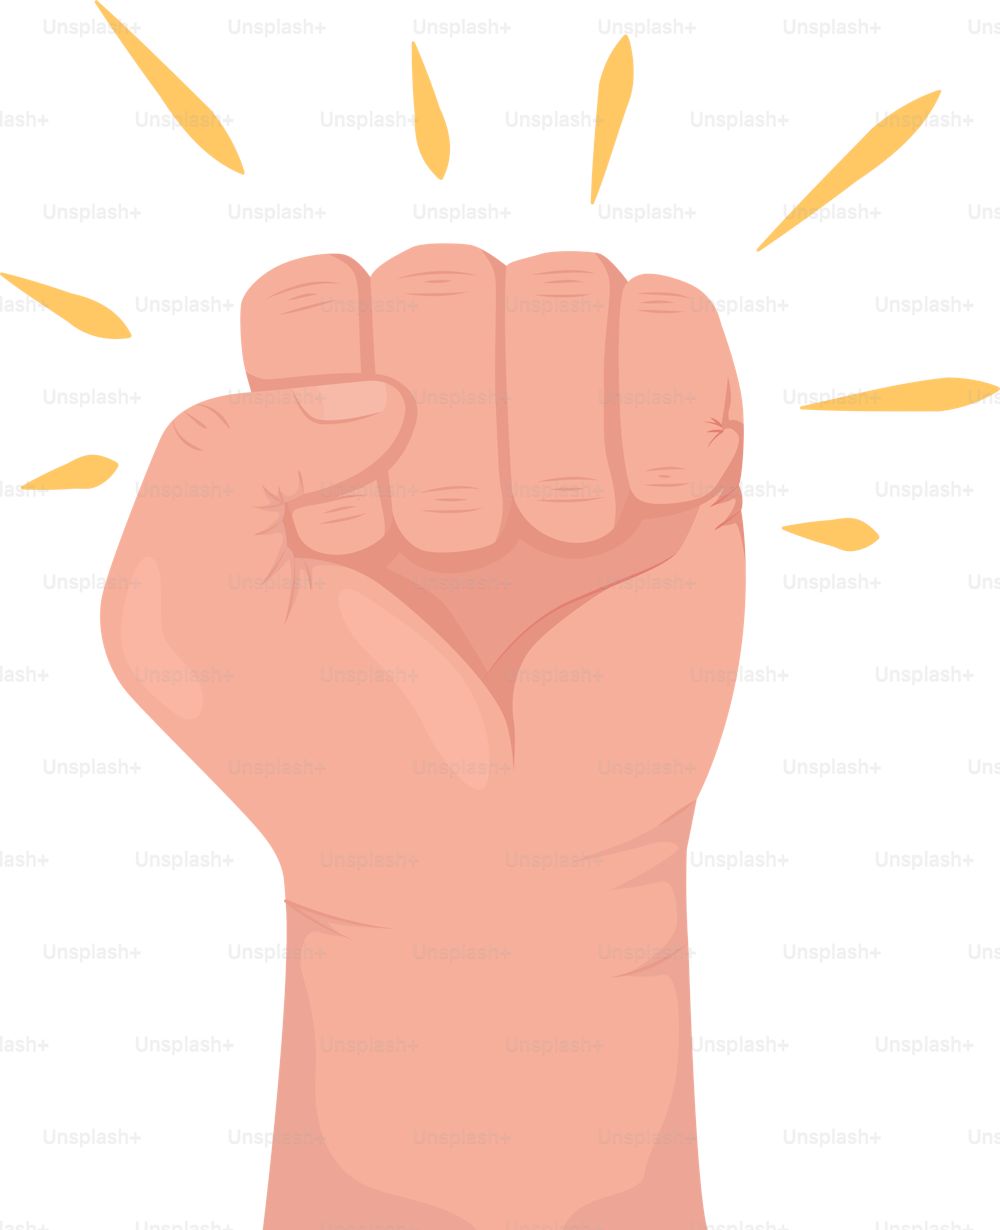 Activist semi flat color vector hand gesture. Editable pose. Human body part on white. Protesting. Raised fist symbol cartoon style illustration for web graphic design, animation, sticker pack